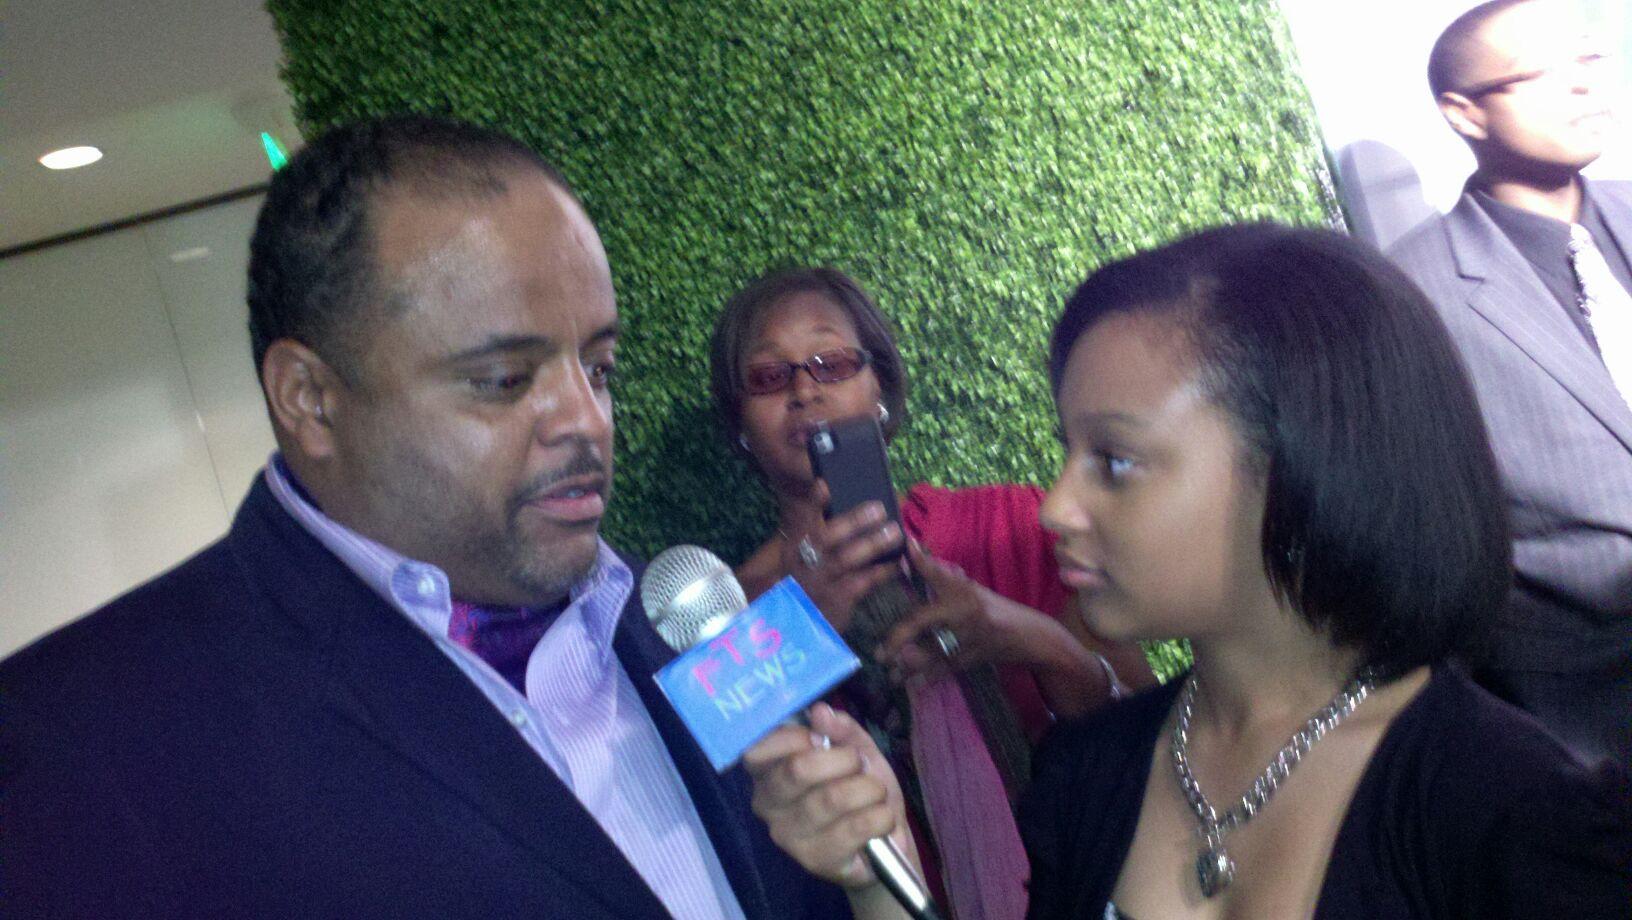 Aliyah at event with Roland Martin